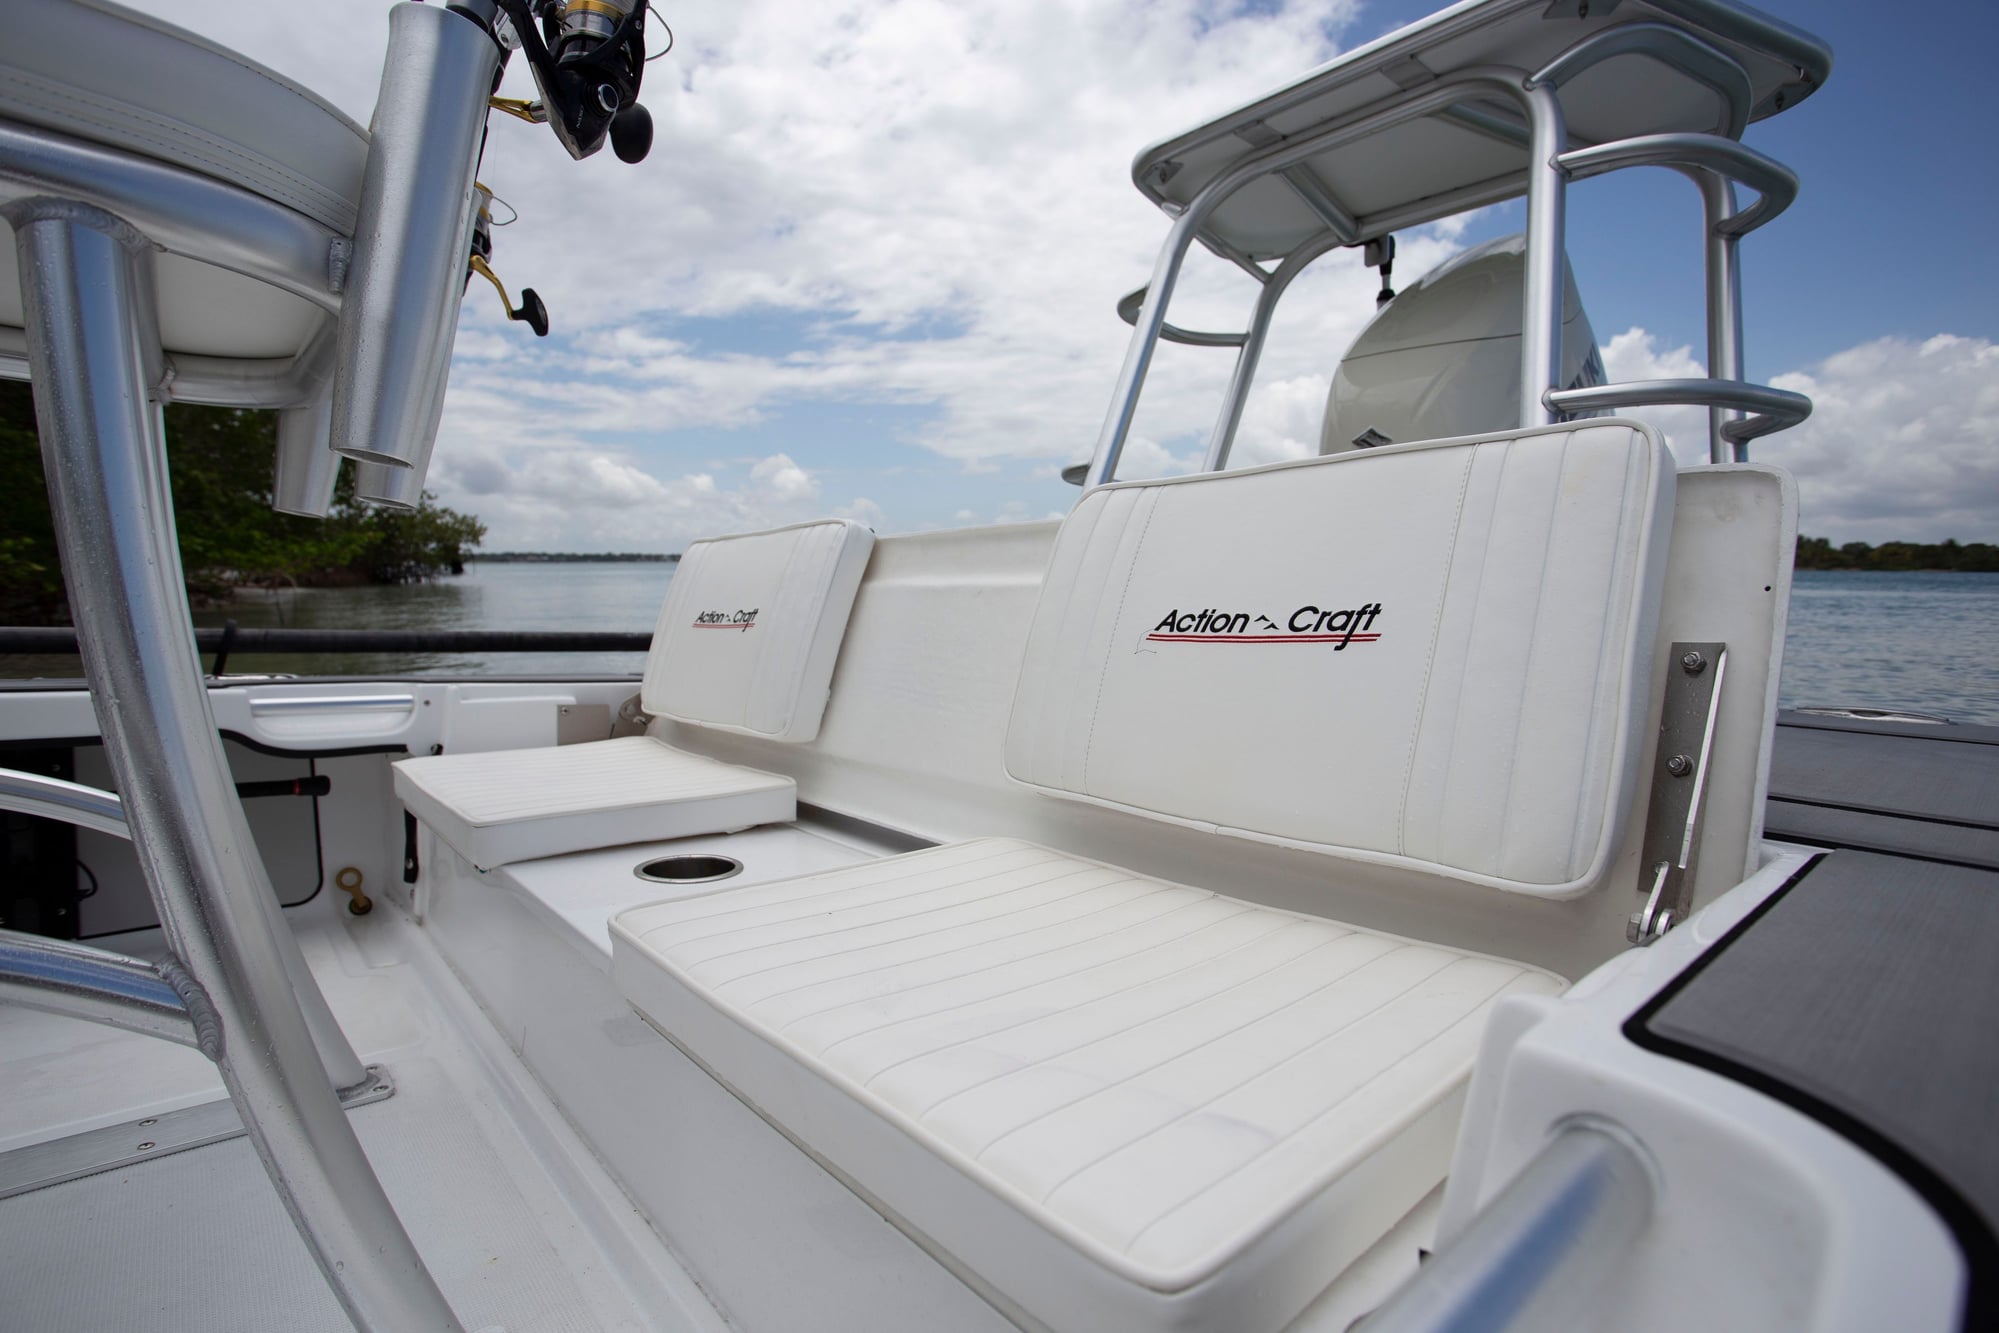 Folding seat back hinges for flats boat - The Hull Truth - Boating and Fishing  Forum